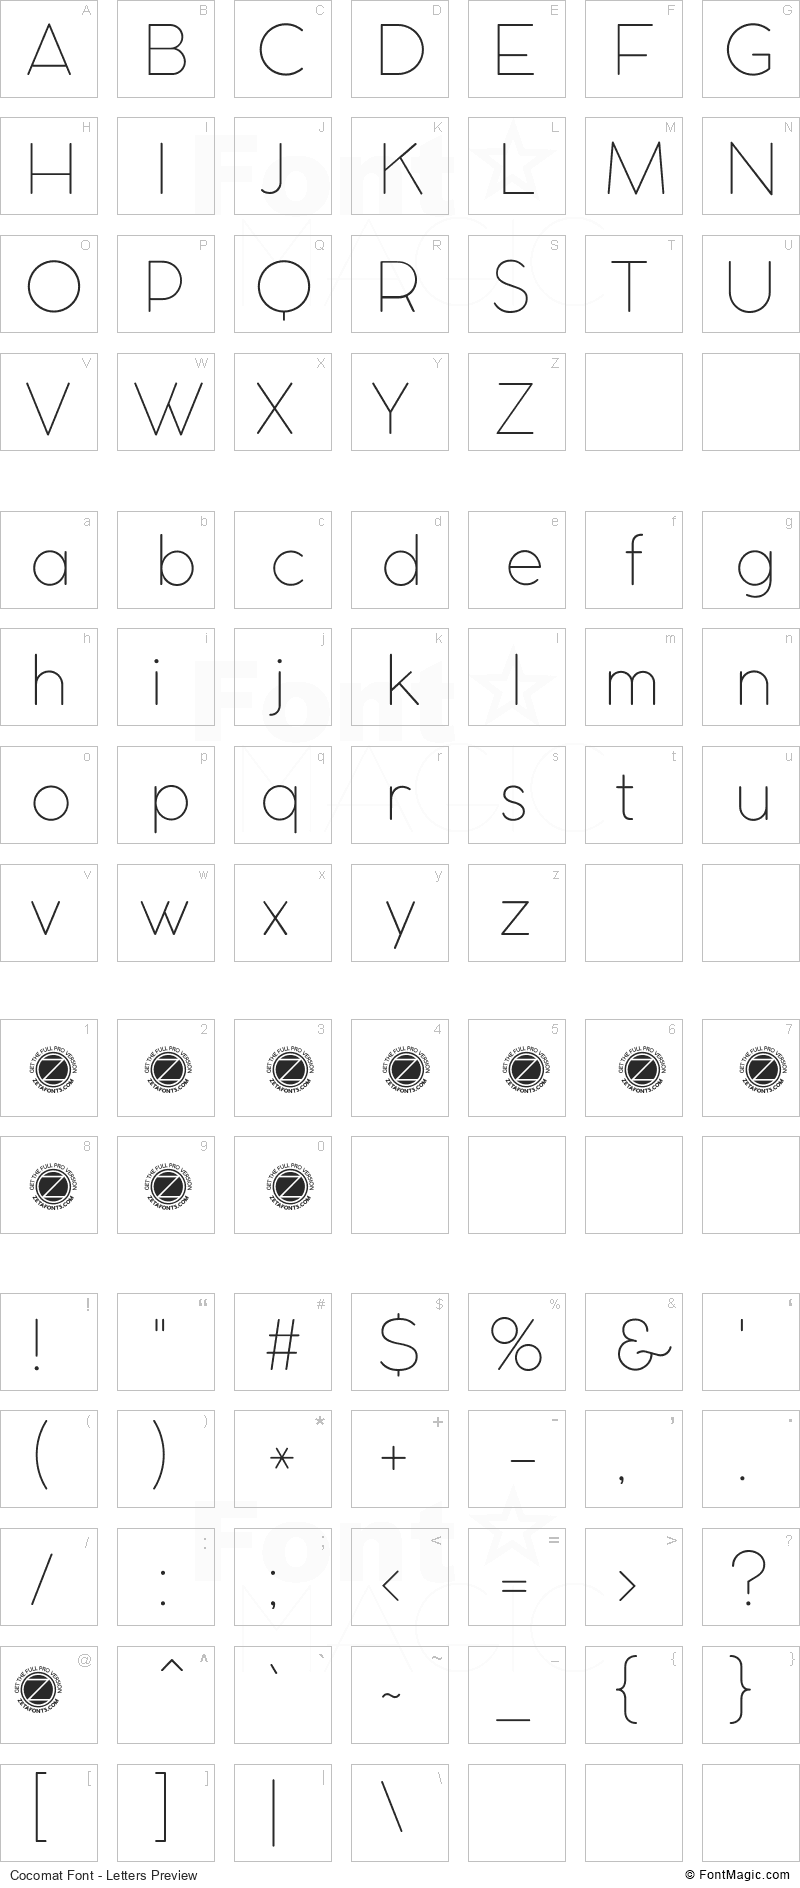 Cocomat Font - All Latters Preview Chart